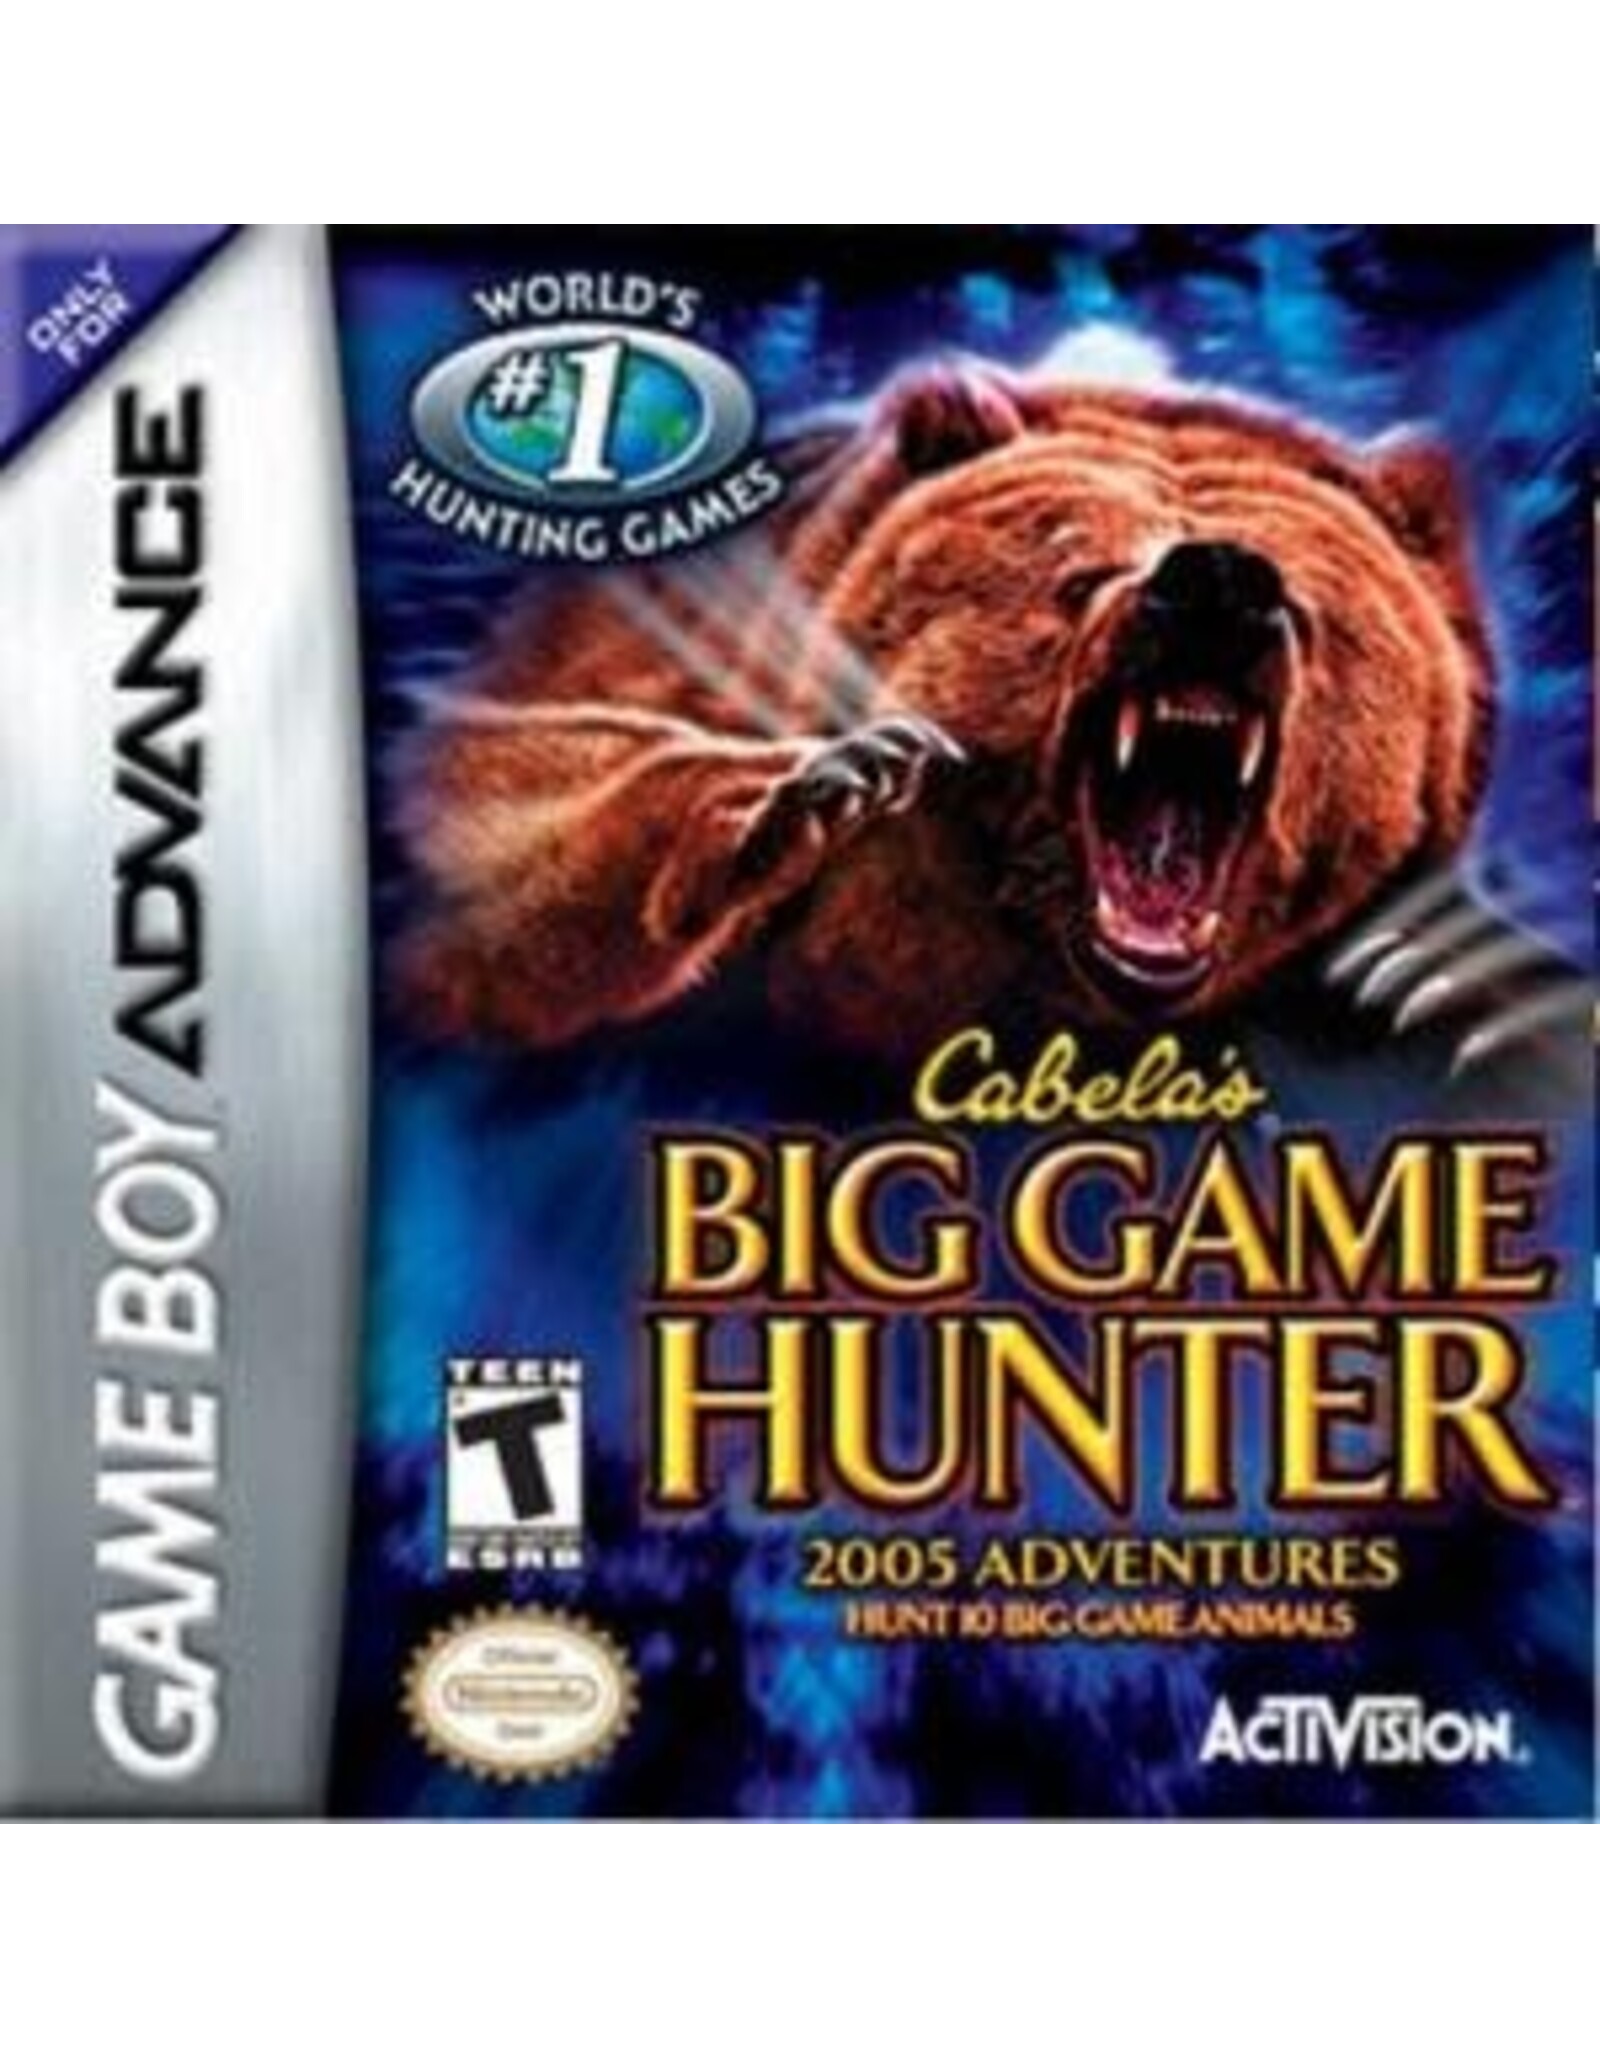 Game Boy Advance Cabela's Big Game Hunter 2005 Adventures (Used, Cart Only)